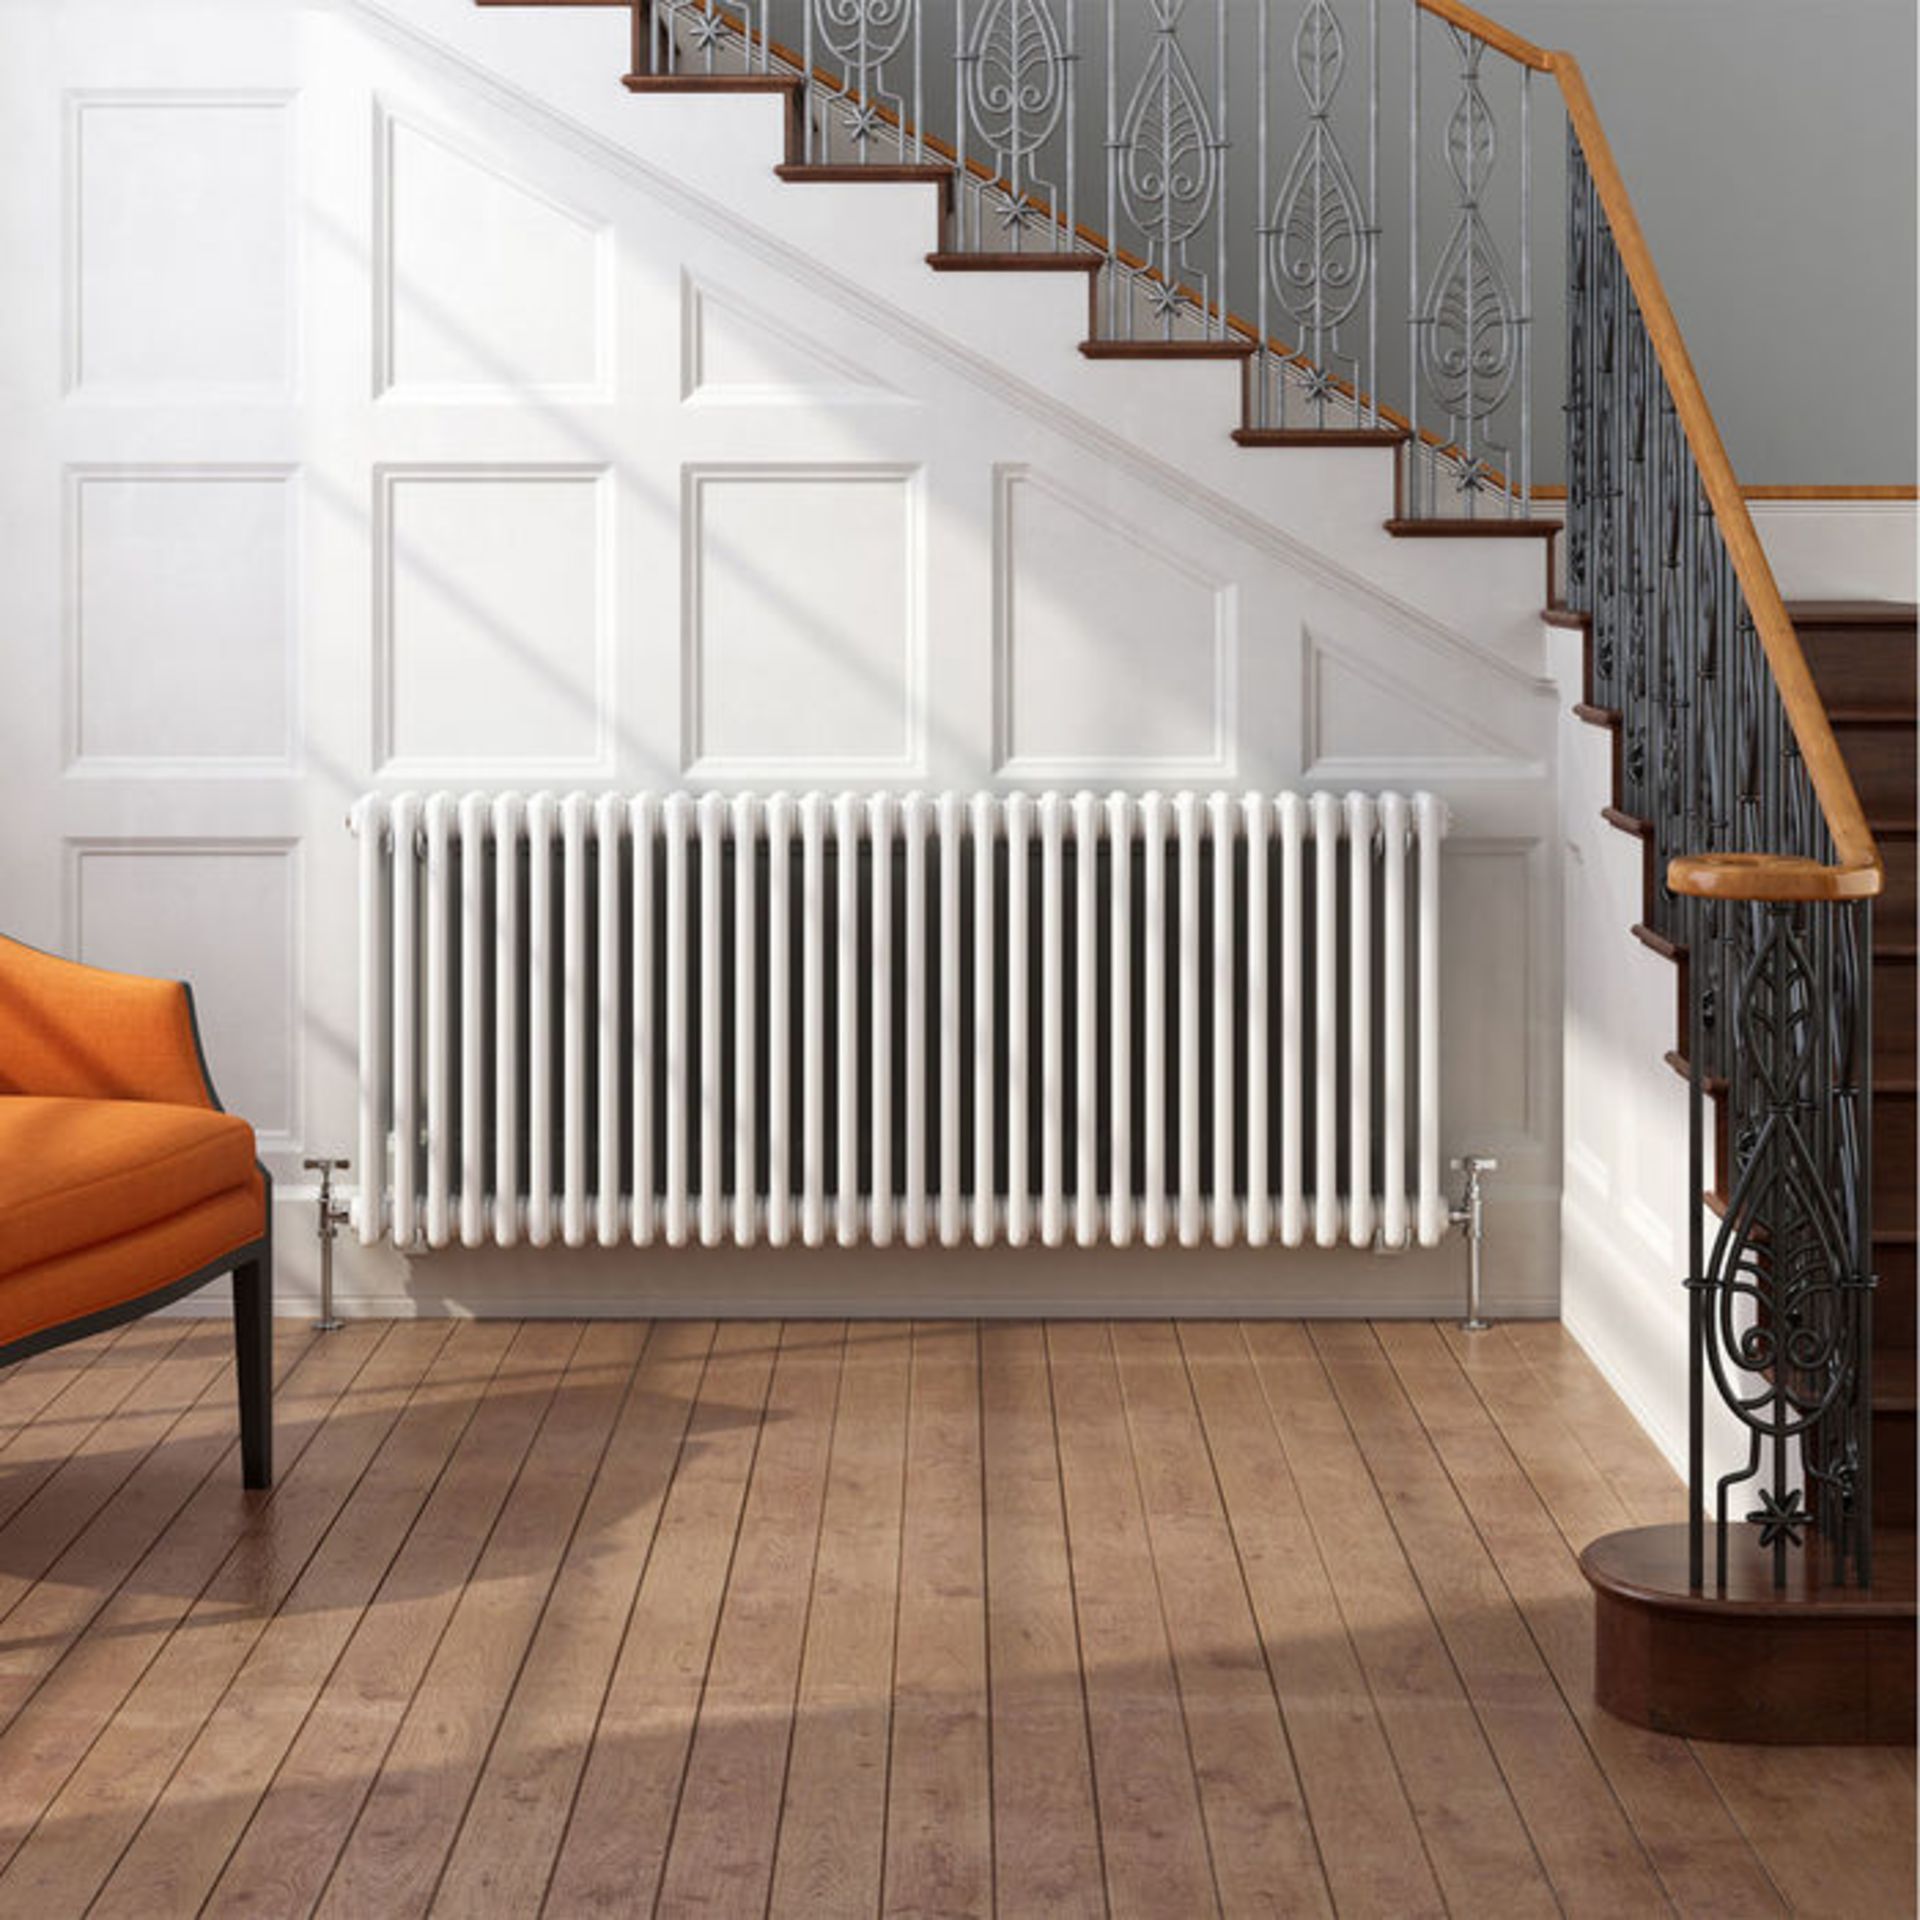 (ED15) 600x1410mm White Double Panel Horizontal Colosseum Traditional Radiator. RRP £552.99. Made - Image 2 of 2